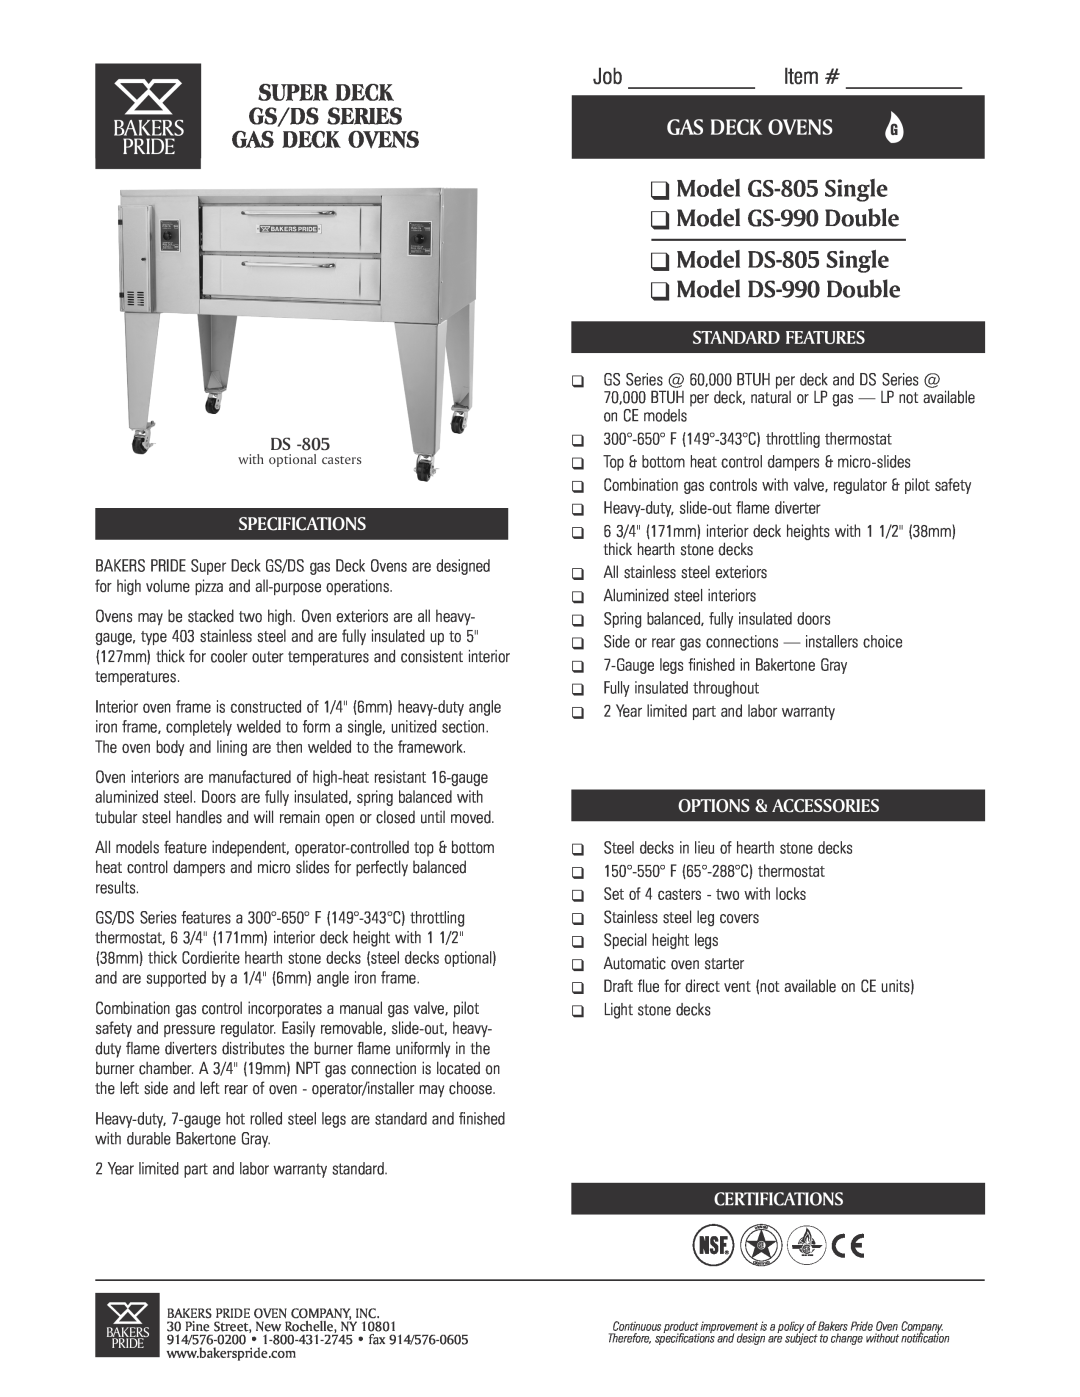 Bakers Pride Oven specifications Model GS-805 Single Model GS-990 Double Model DS-805 Single, Model DS-990 Double 